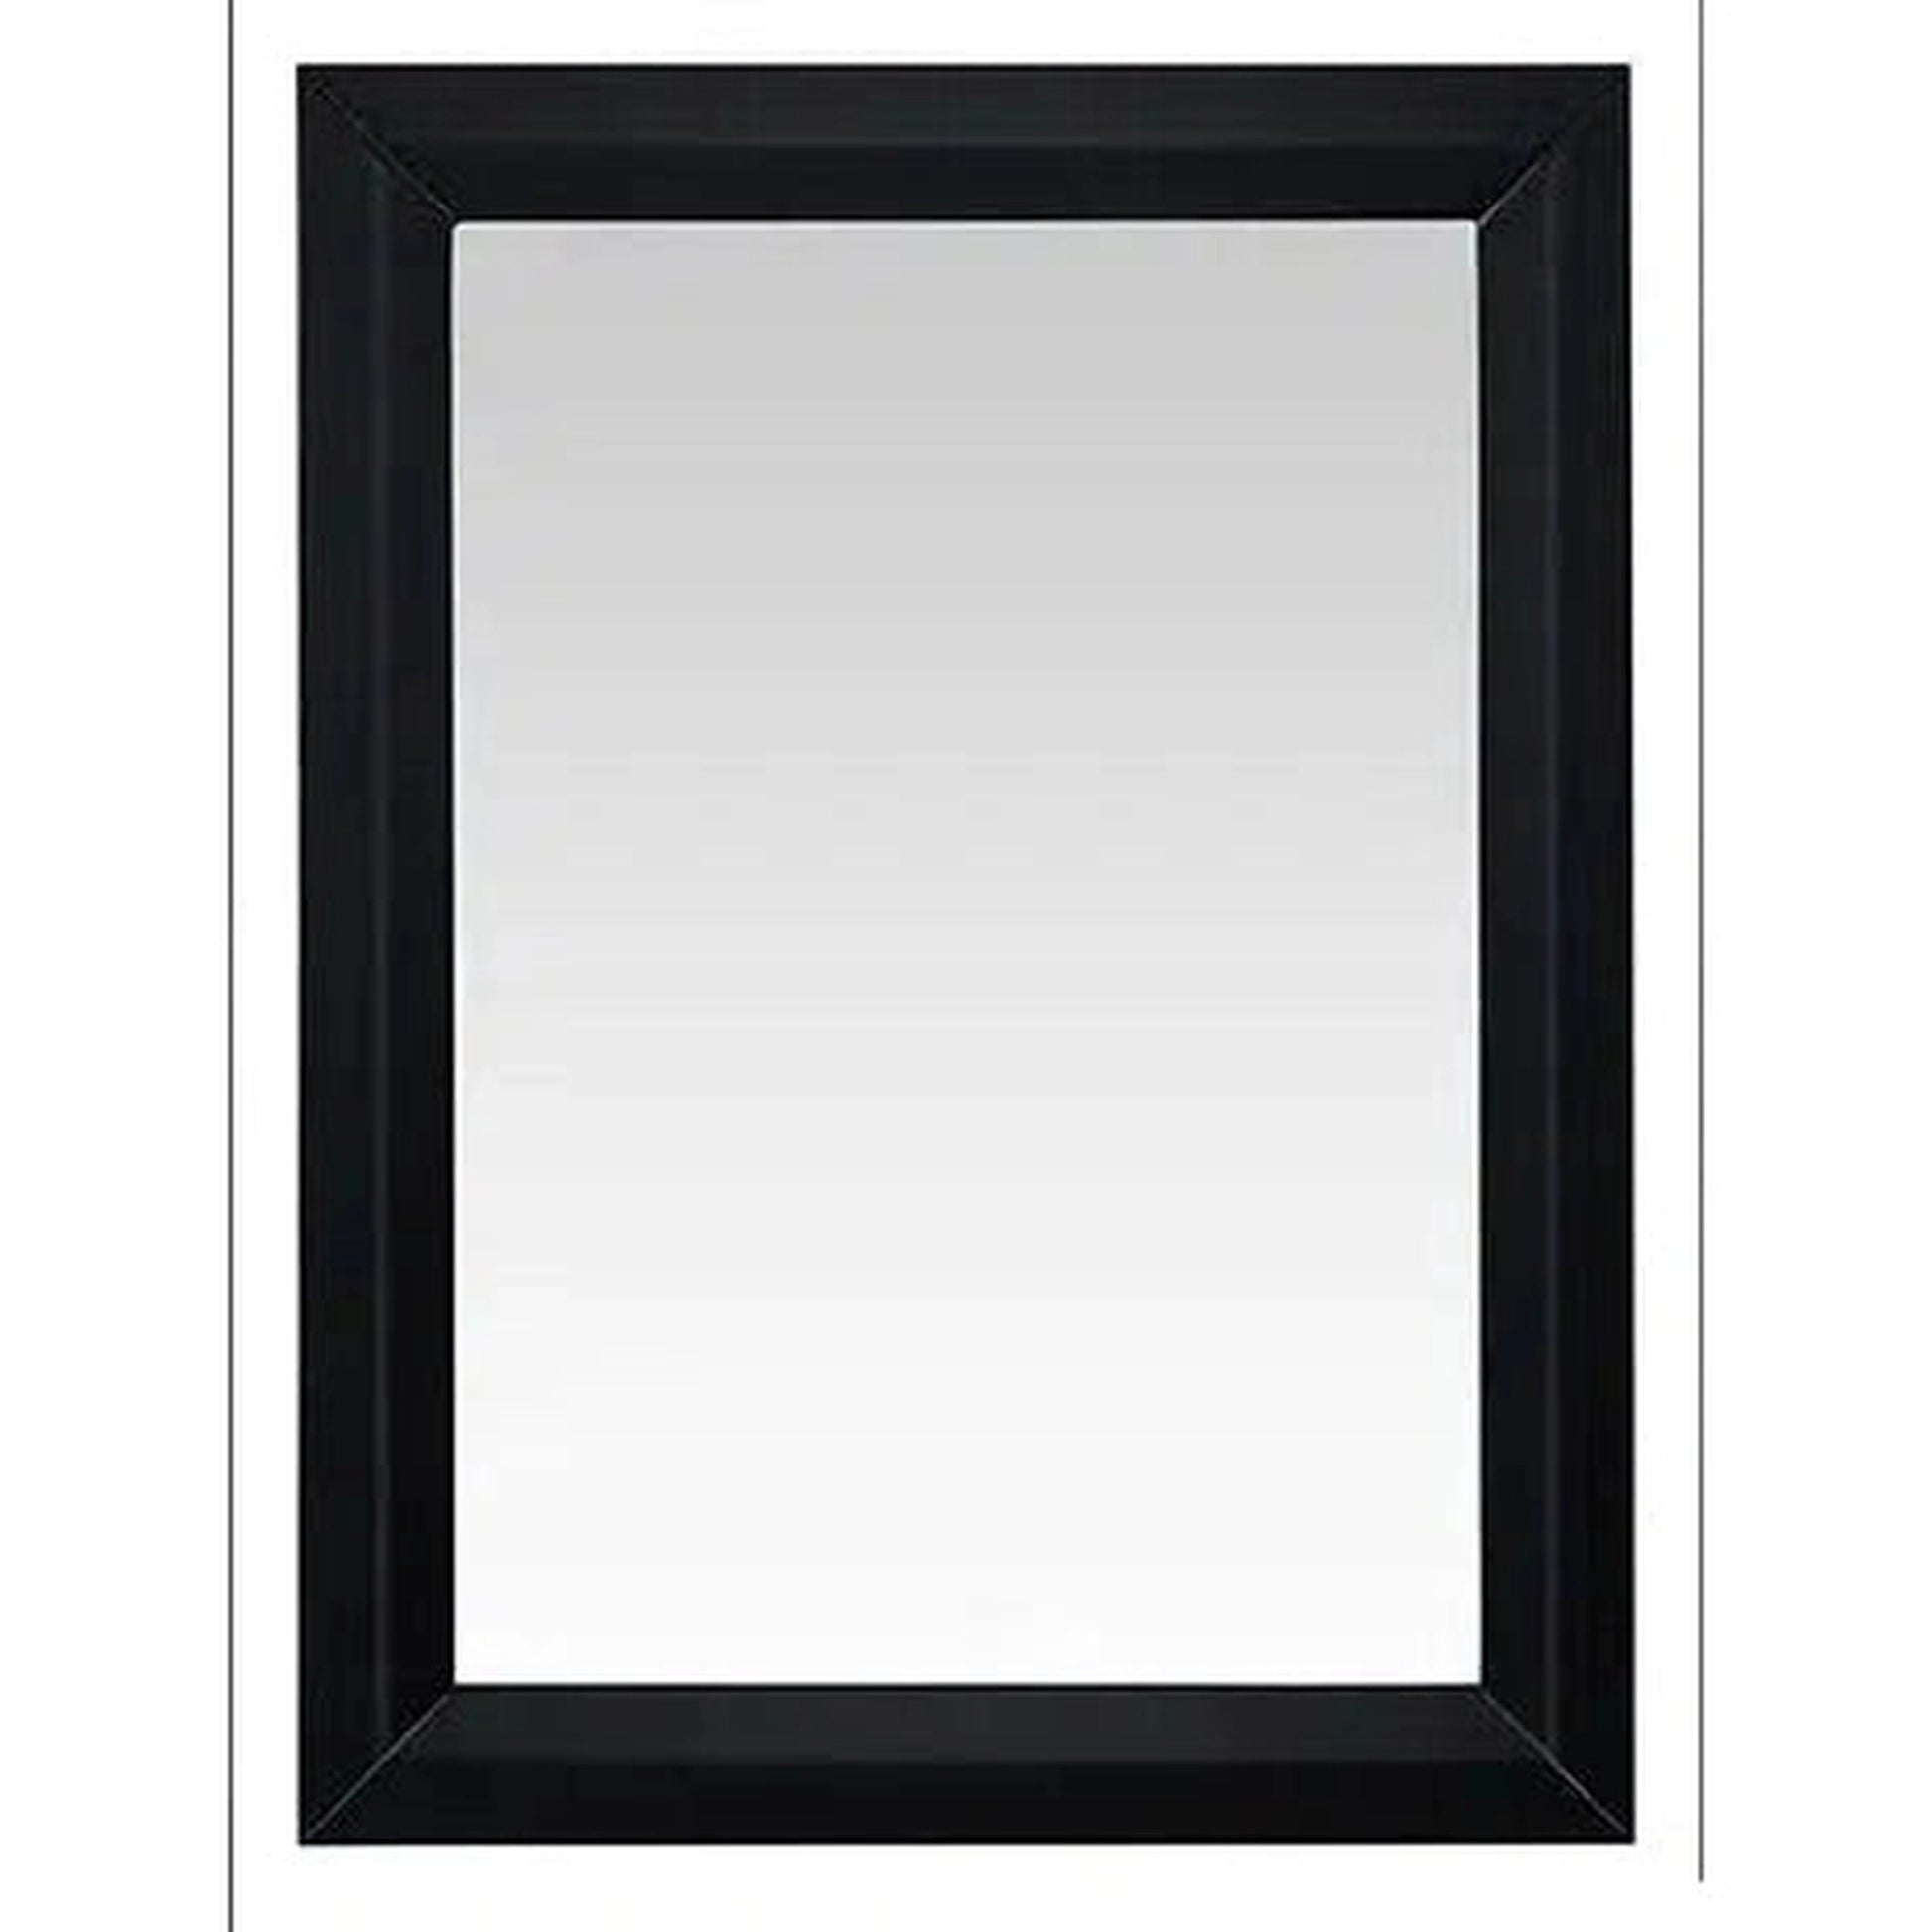 Ancerre Designs 24" x 32" Rectangle Black Onyx Solid Wood Framed Bathroom Vanity Mirror With Mounting Hardware